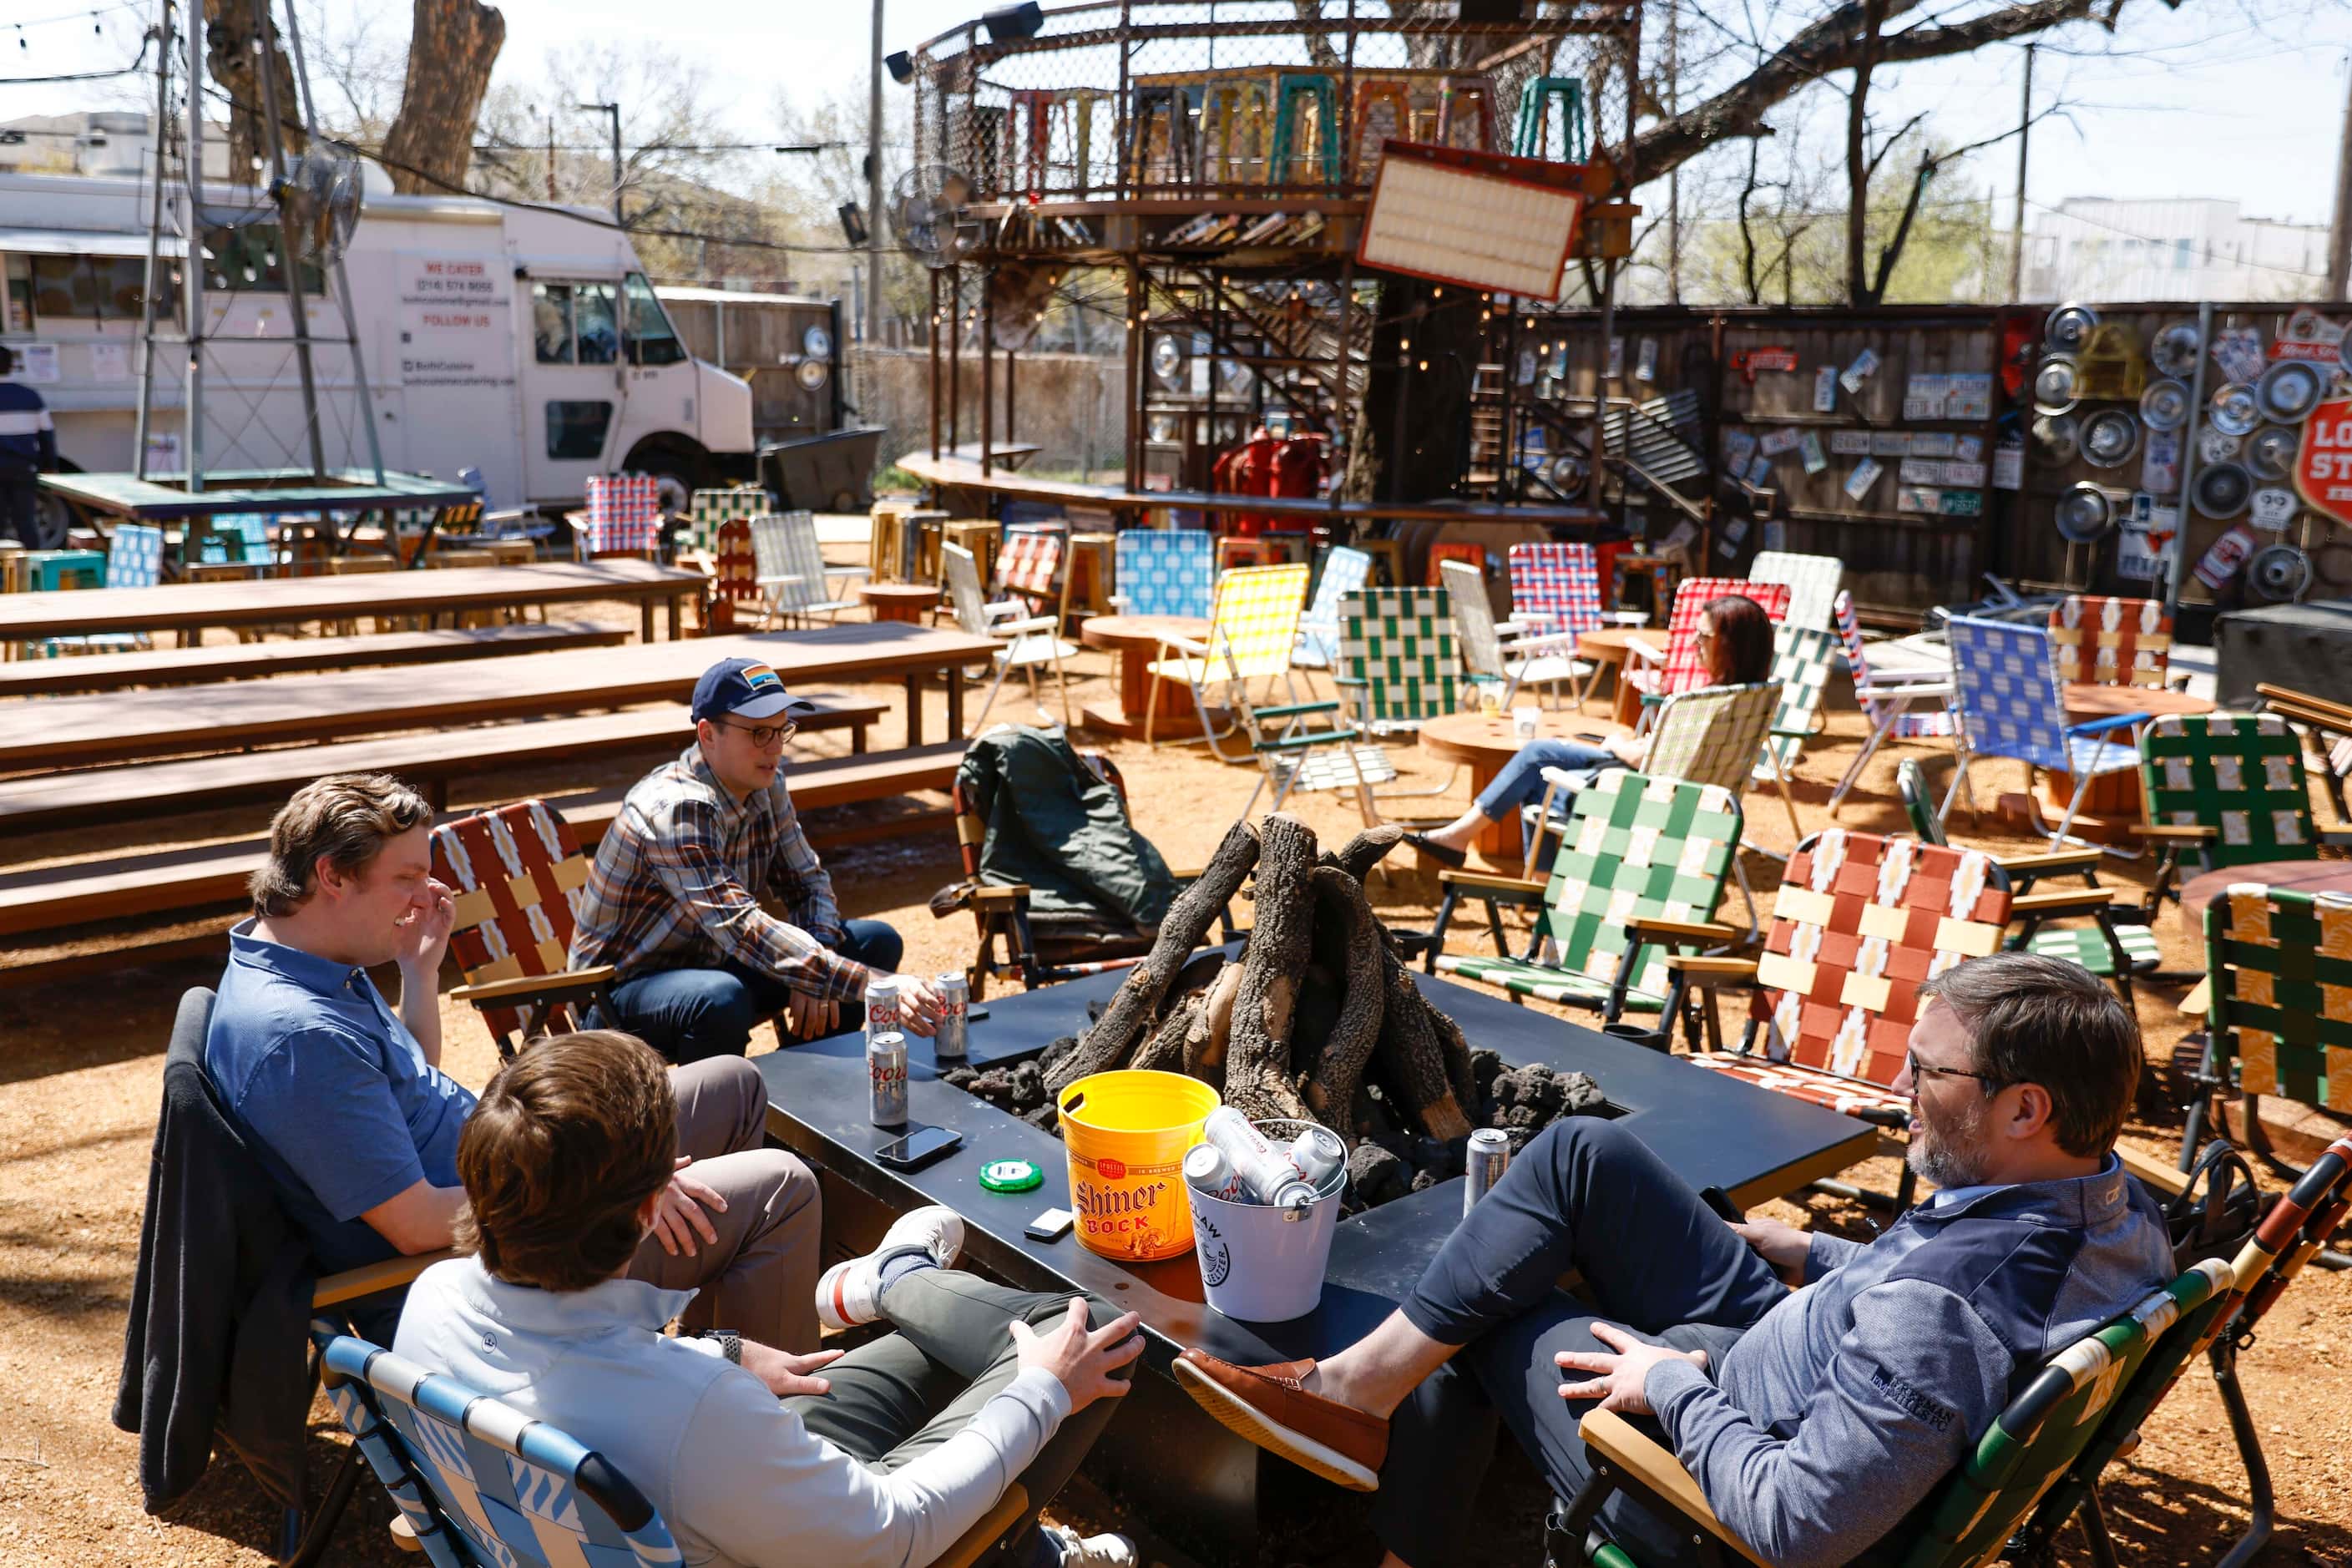 The backyard at Truck Yard in Dallas looks similar today as it did in 2022, before the...